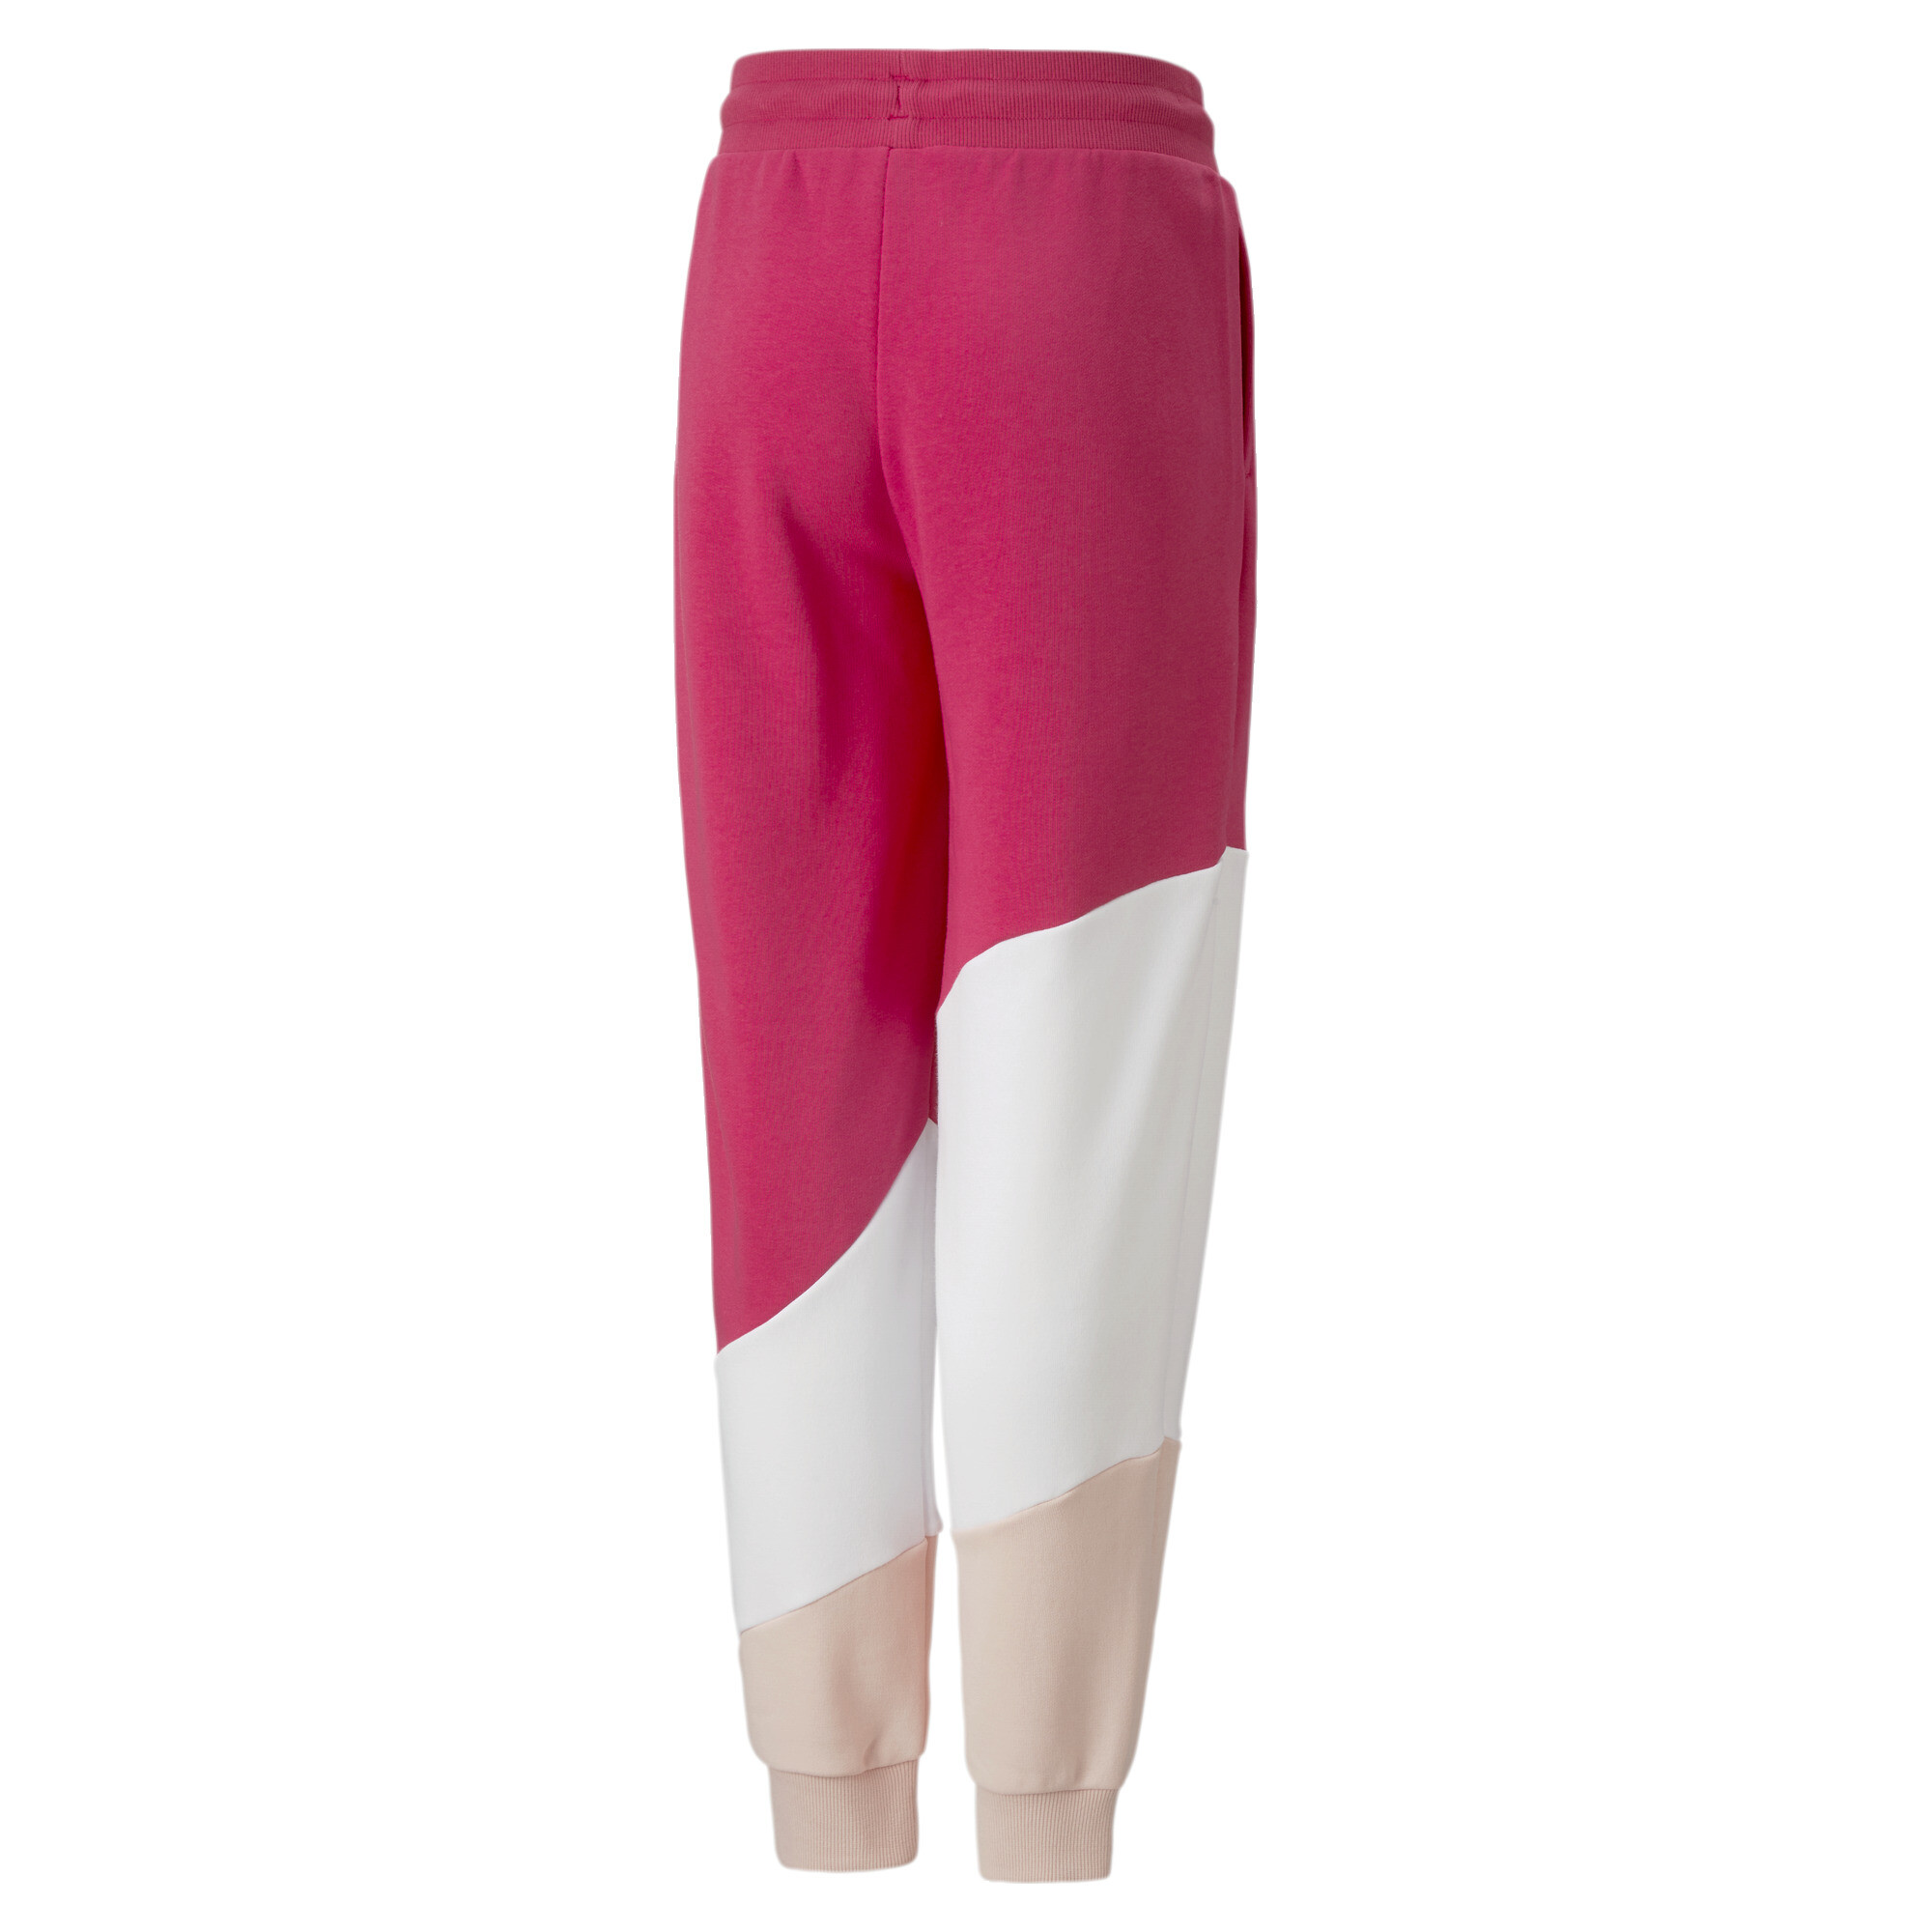 PUMA POWER Cat Pants In Pink, Size 4-5 Youth